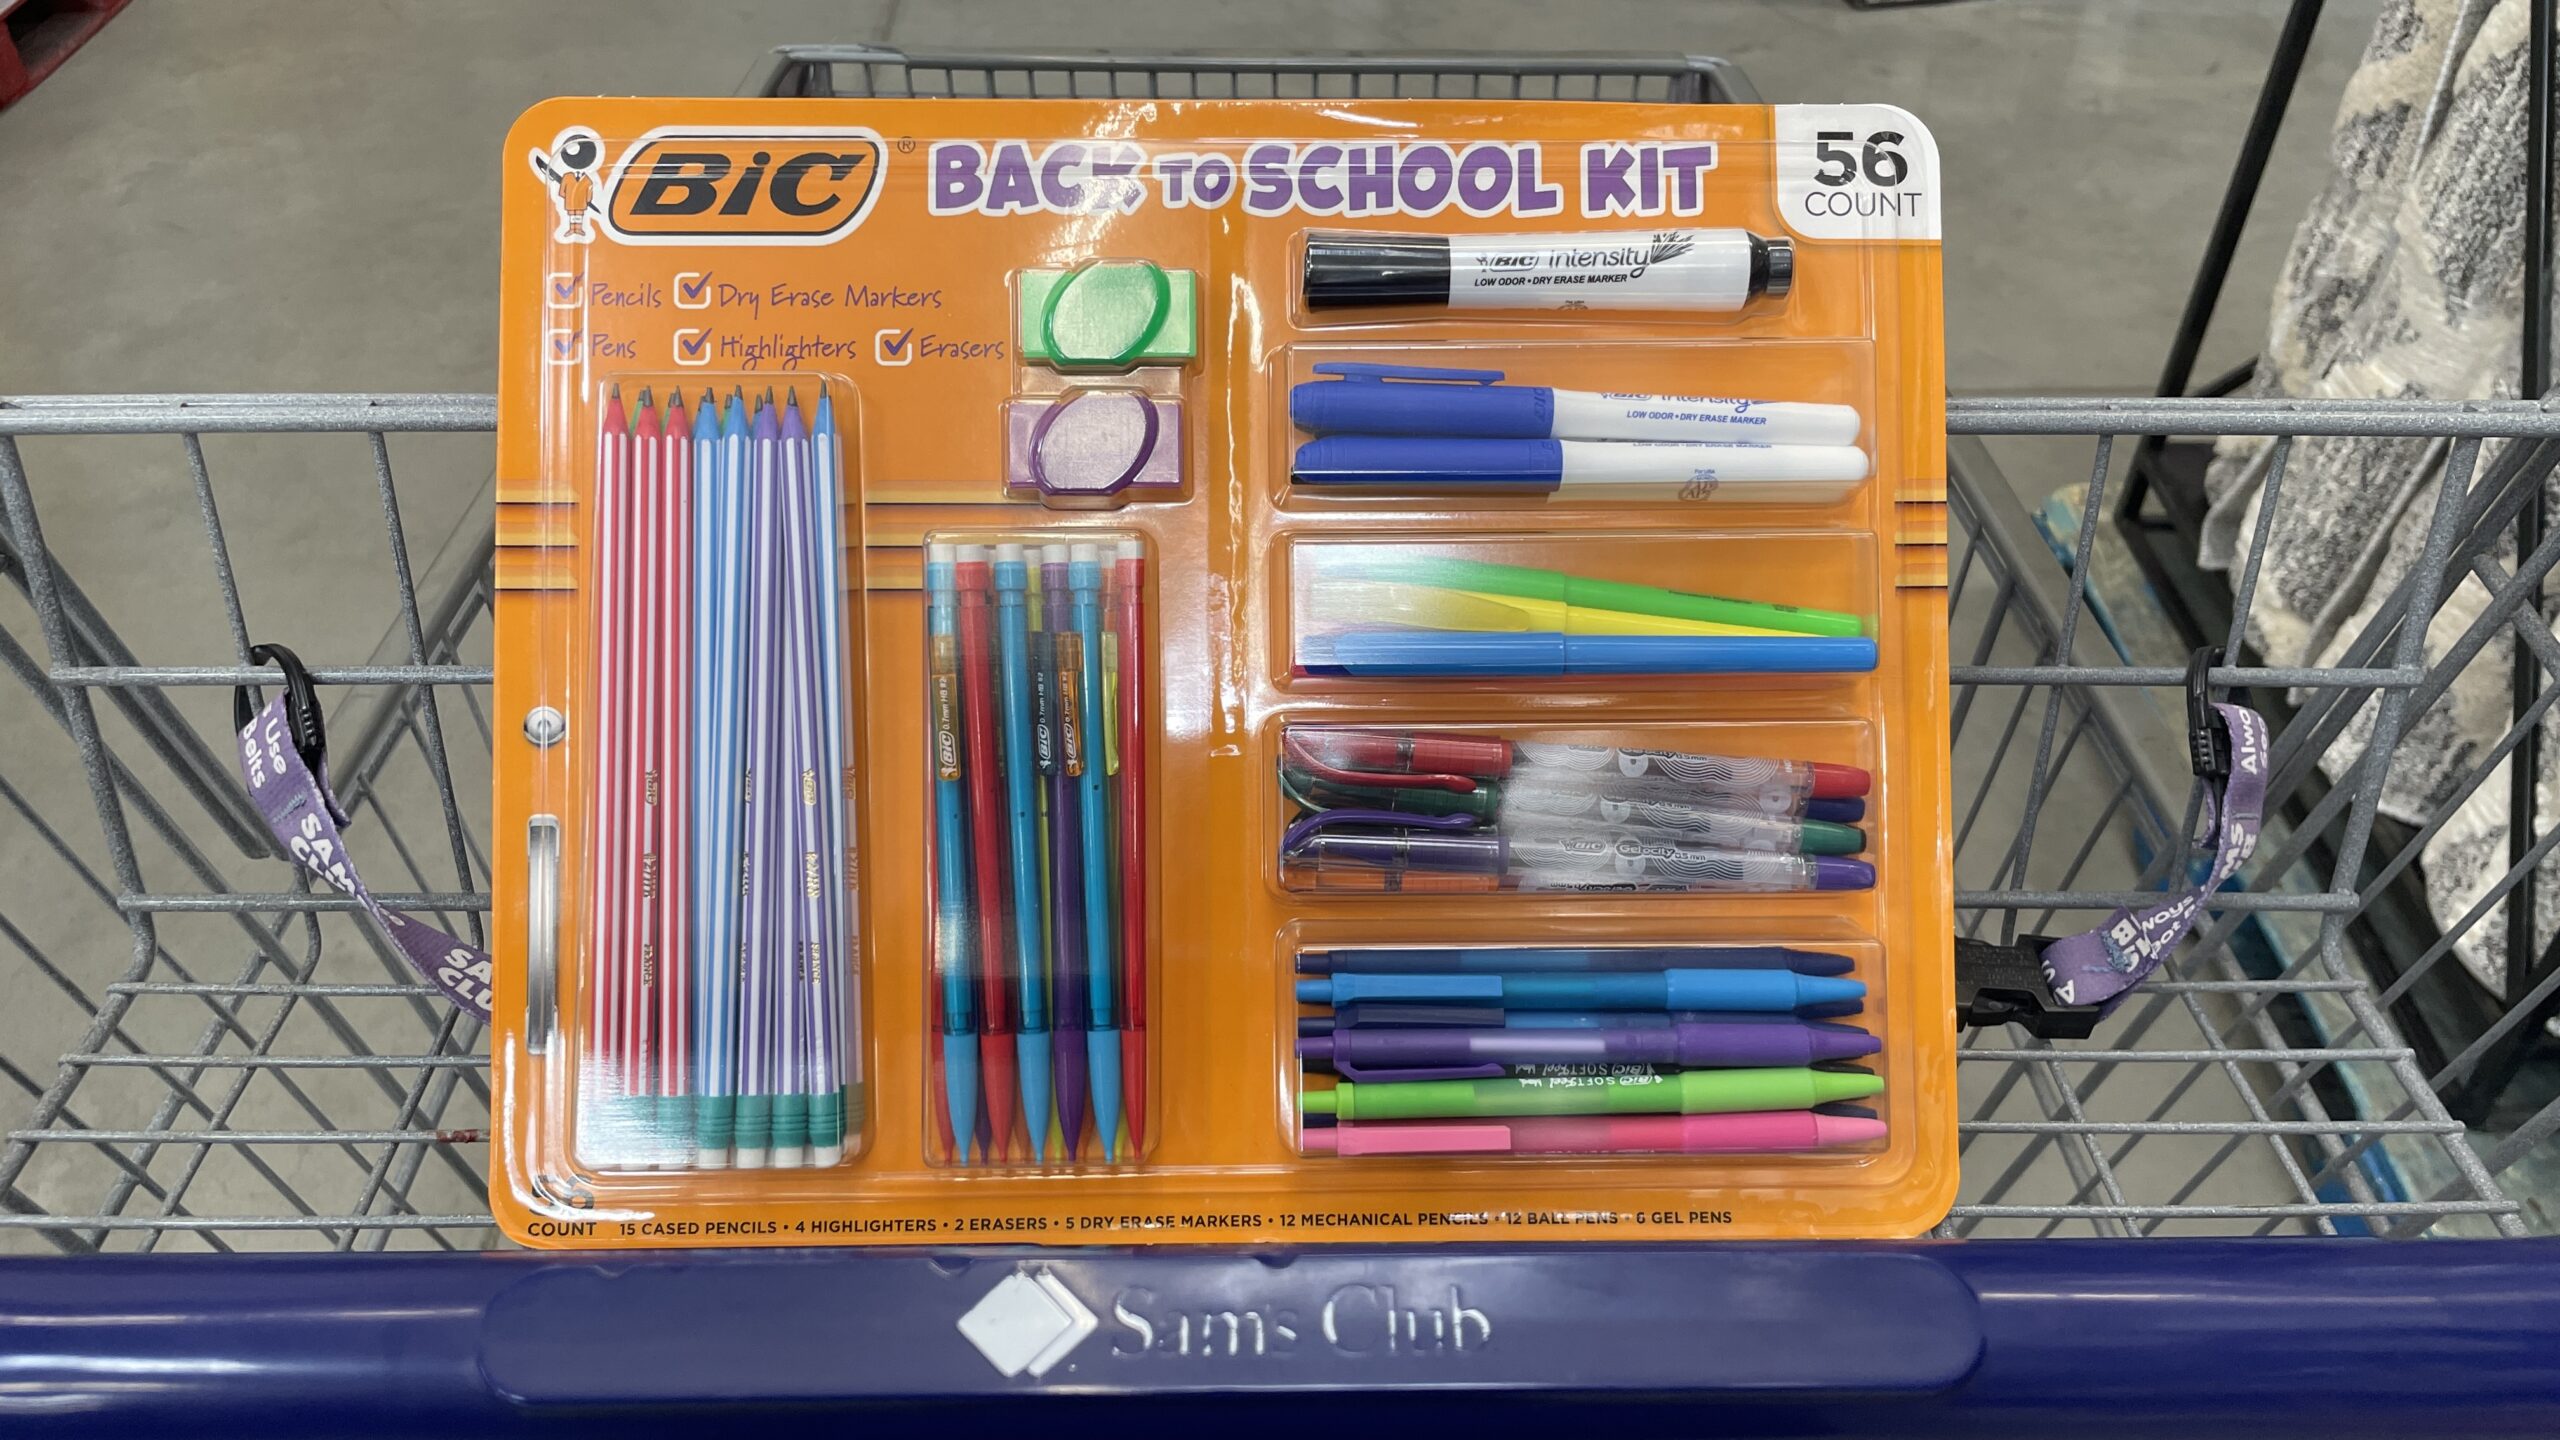 Sam’s Club is Selling A BIC Back to School Kit for Under $7